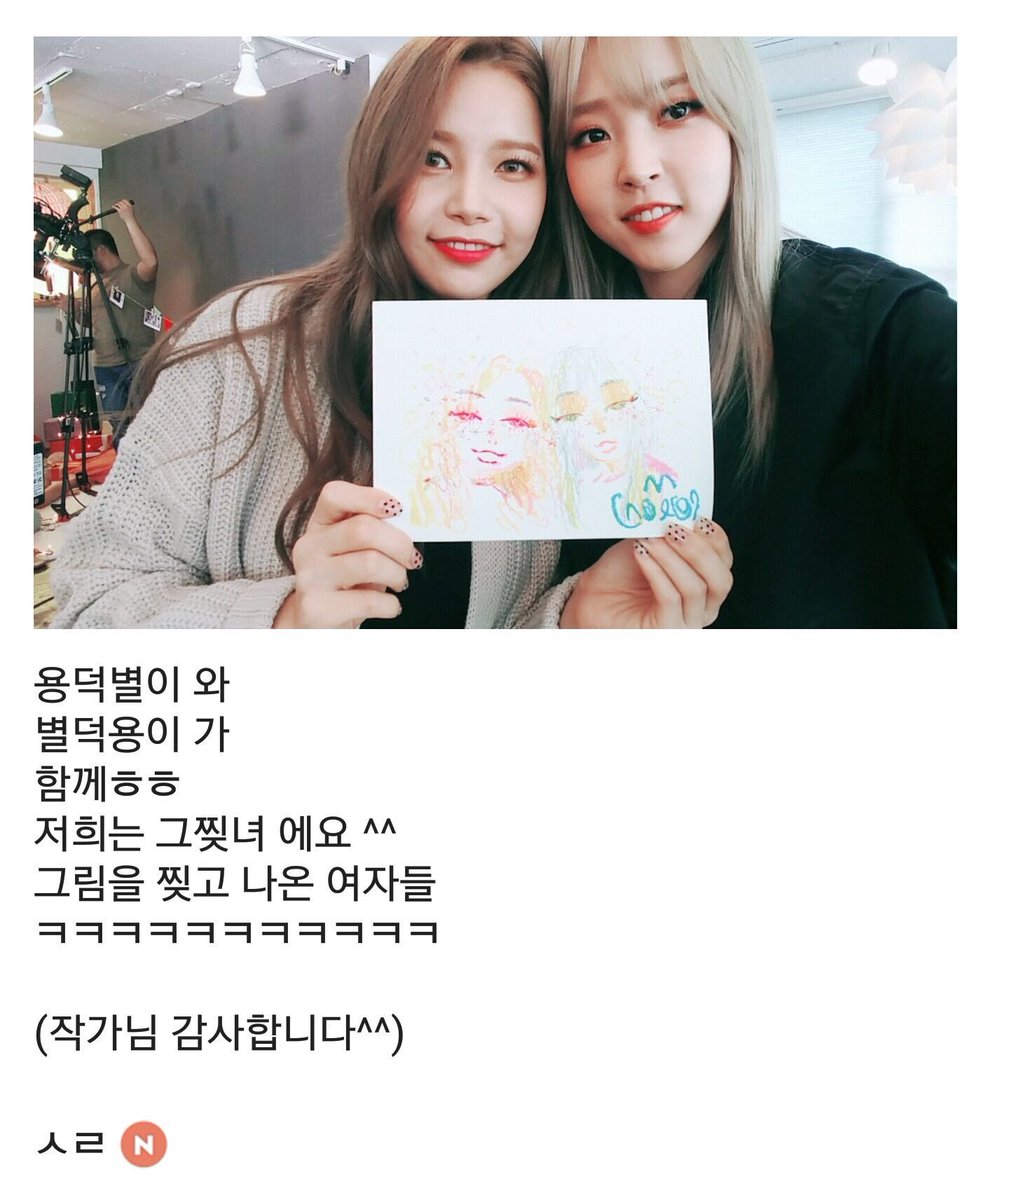 the way yong describes the long process of becoming a Byul-fan on a fancafe memo- Became a fan- Denial stage- Hiding but caring stage- Acceptancesounds very similar to another process of acceptance that some people go through 